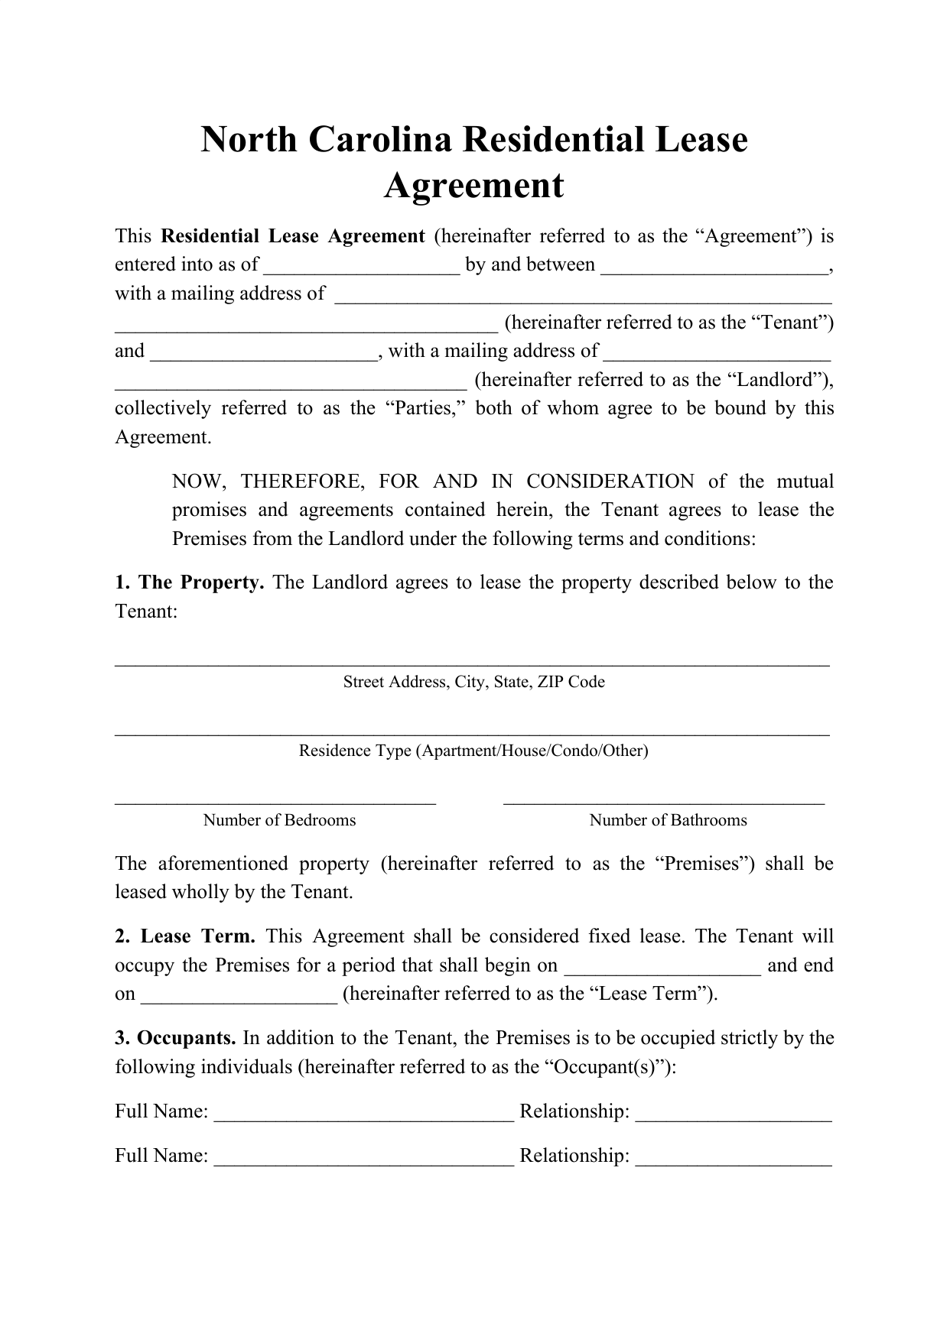 north carolina residential lease agreement template